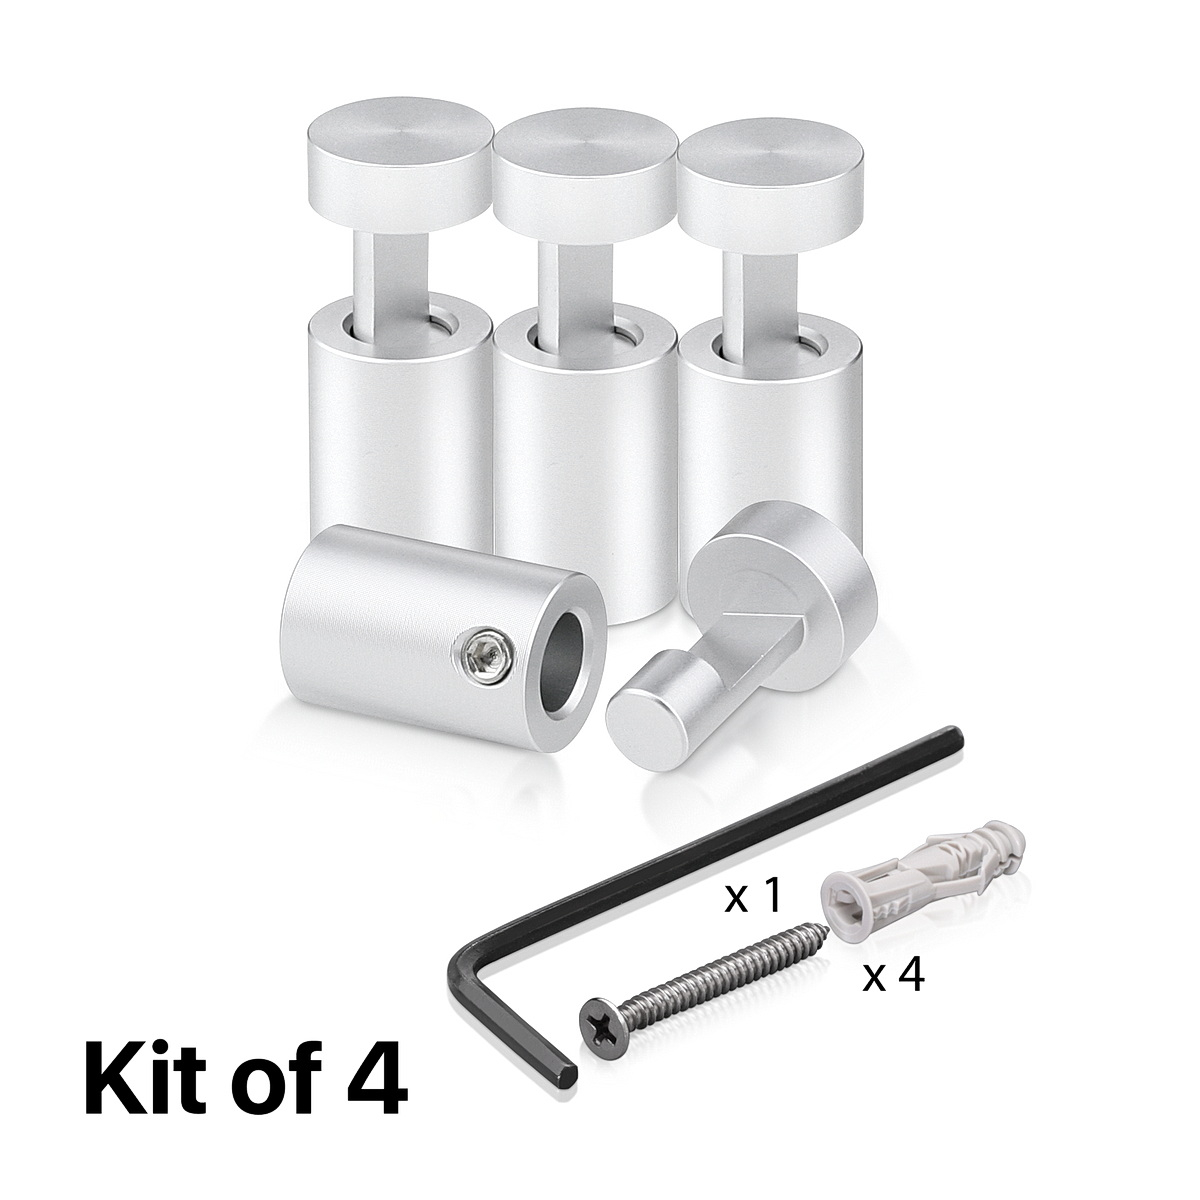 (Set of 4) 1/2'' Diameter X 3/4'' Barrel Length, Aluminum Clear Anodized Finish. Adjustable Edge Grip Standoff with (4) 2208Z Screw and (4) LANC1 Anchor  for concrete/drywall (For Inside Use Only)